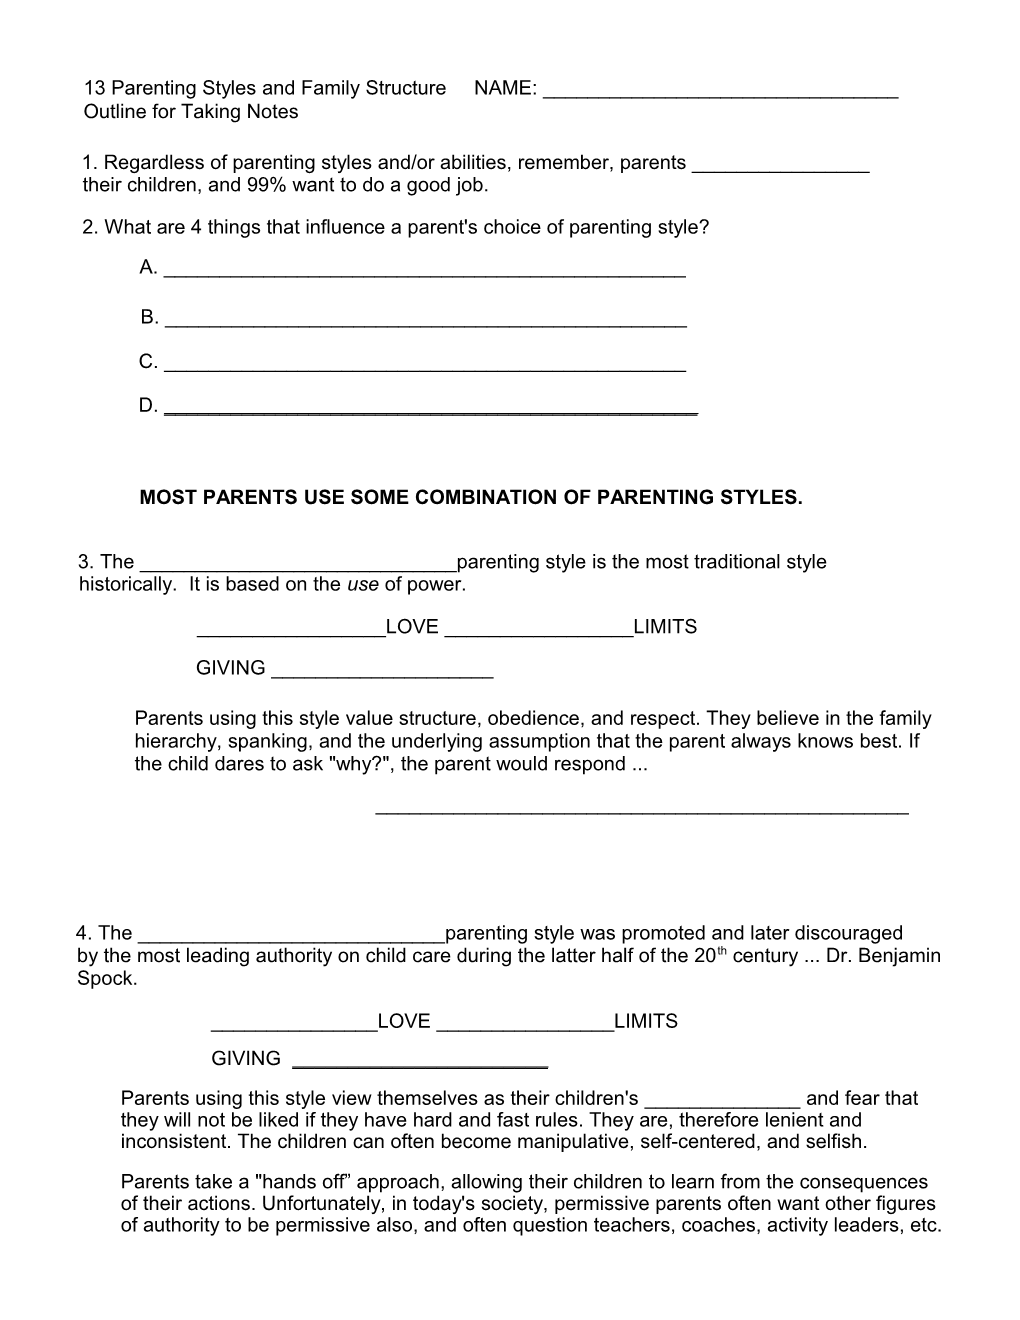 Worksheet Over Parenting Styles